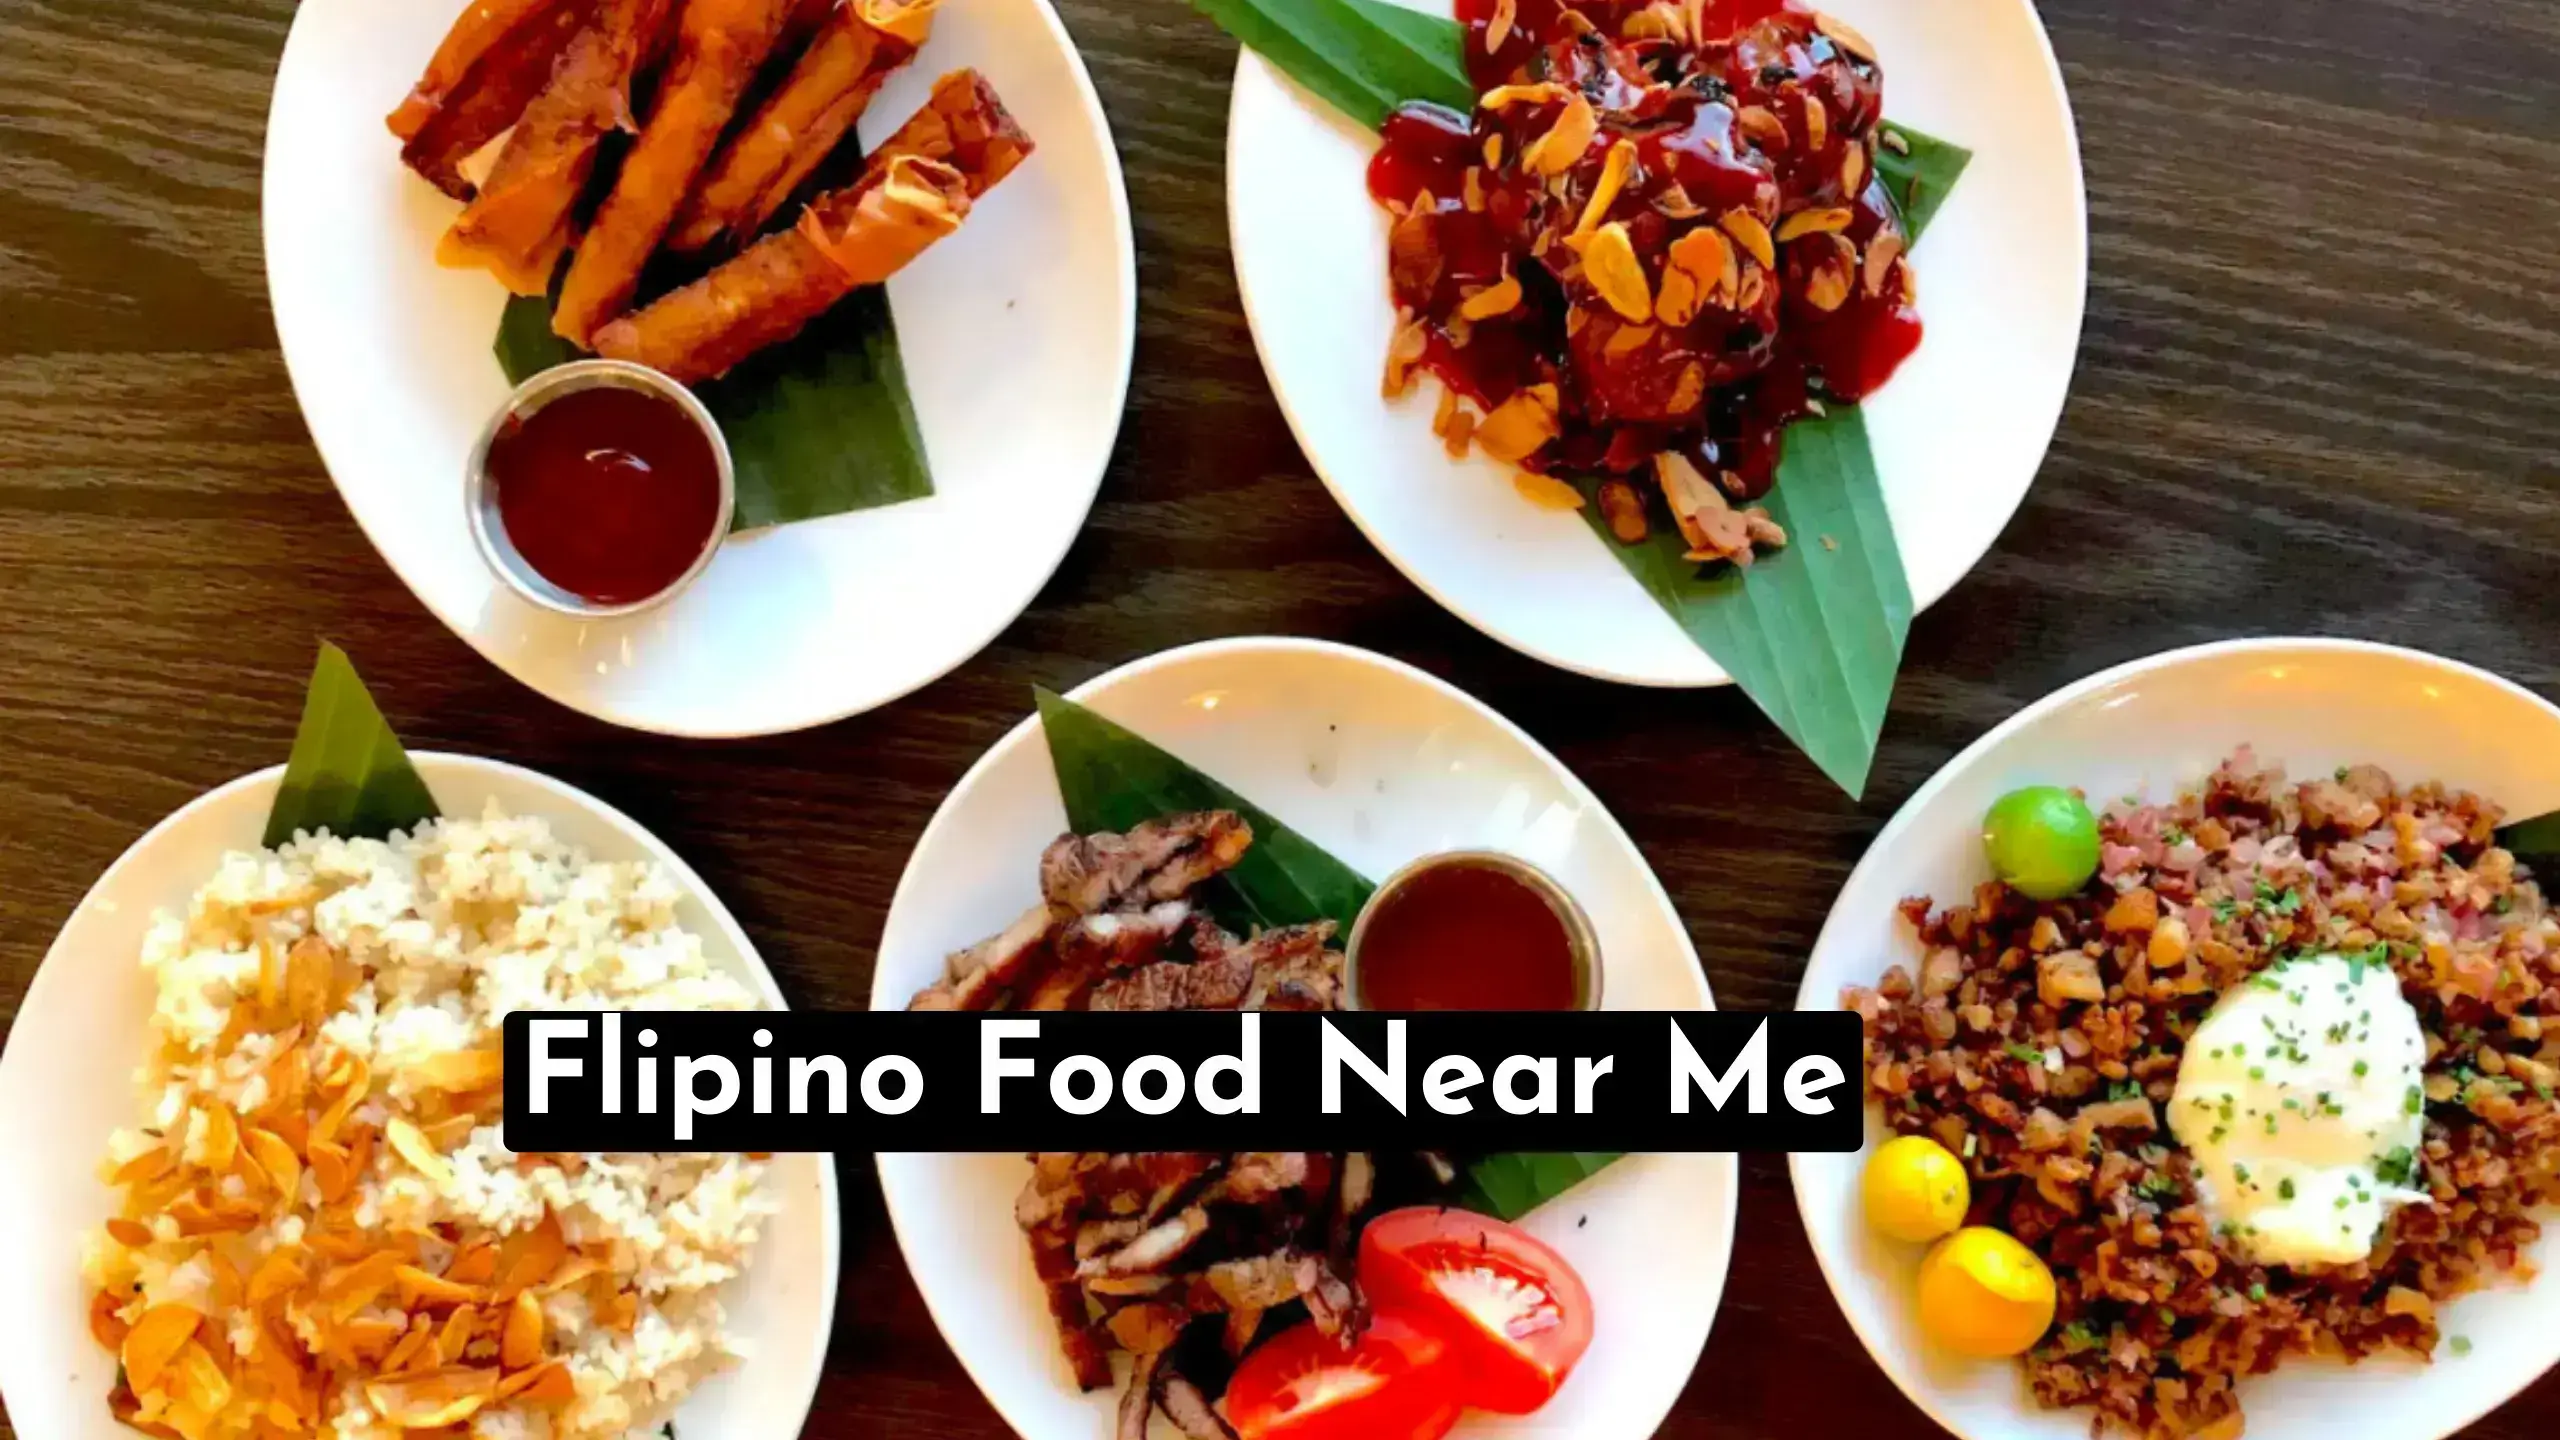 Filipino Food Near Me: Find The Best Place to Satisfy Your Hunger!